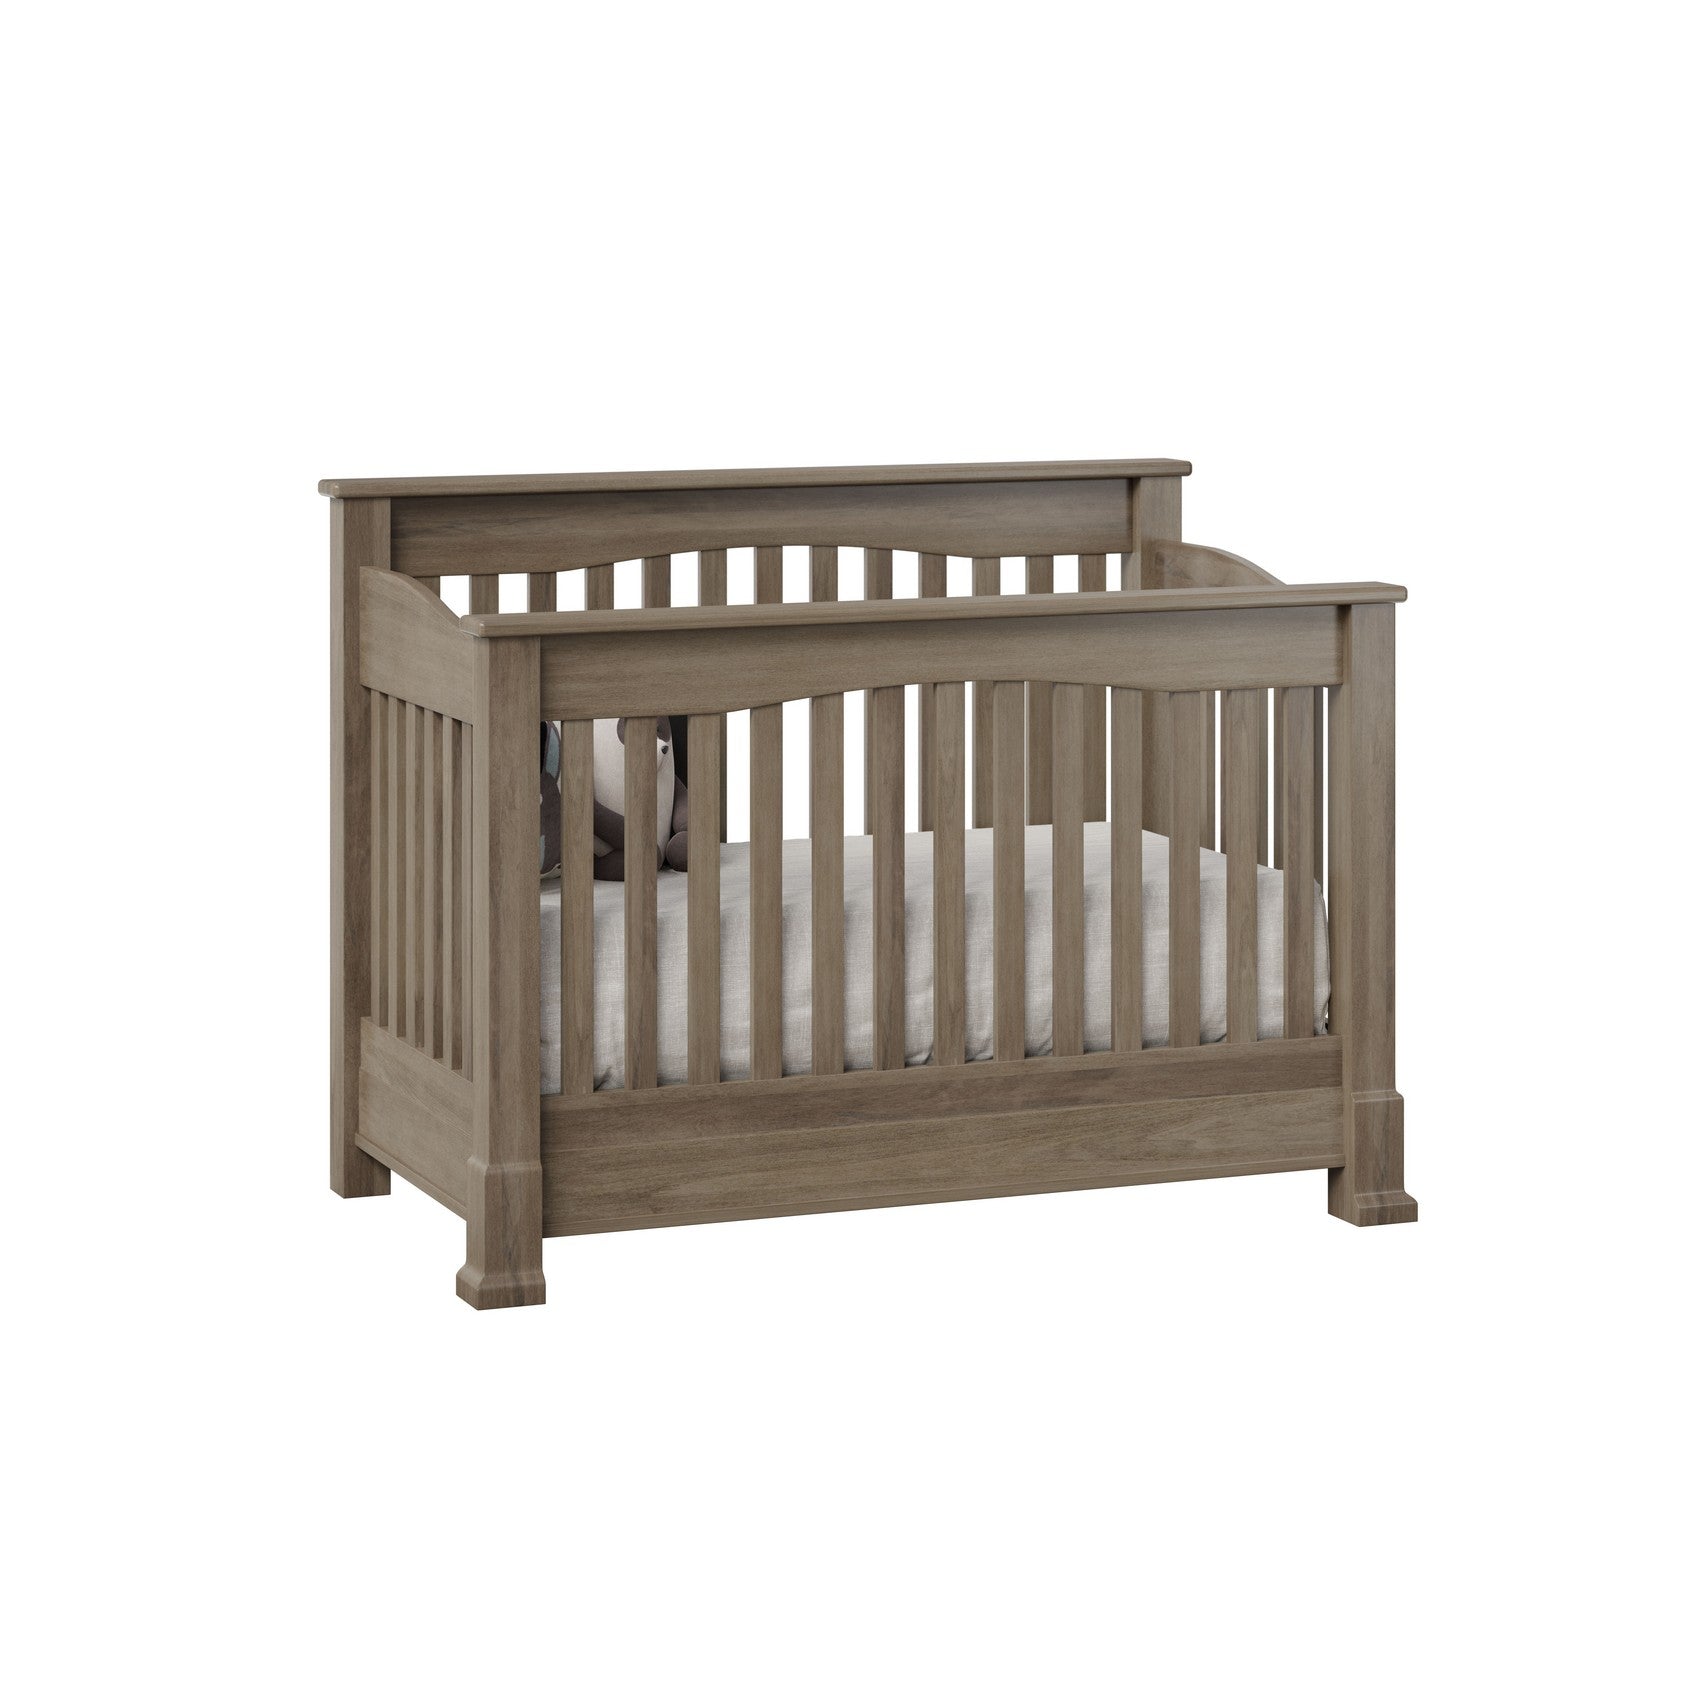 mackenzie slat back baby crib in sap cherry with mineral stain